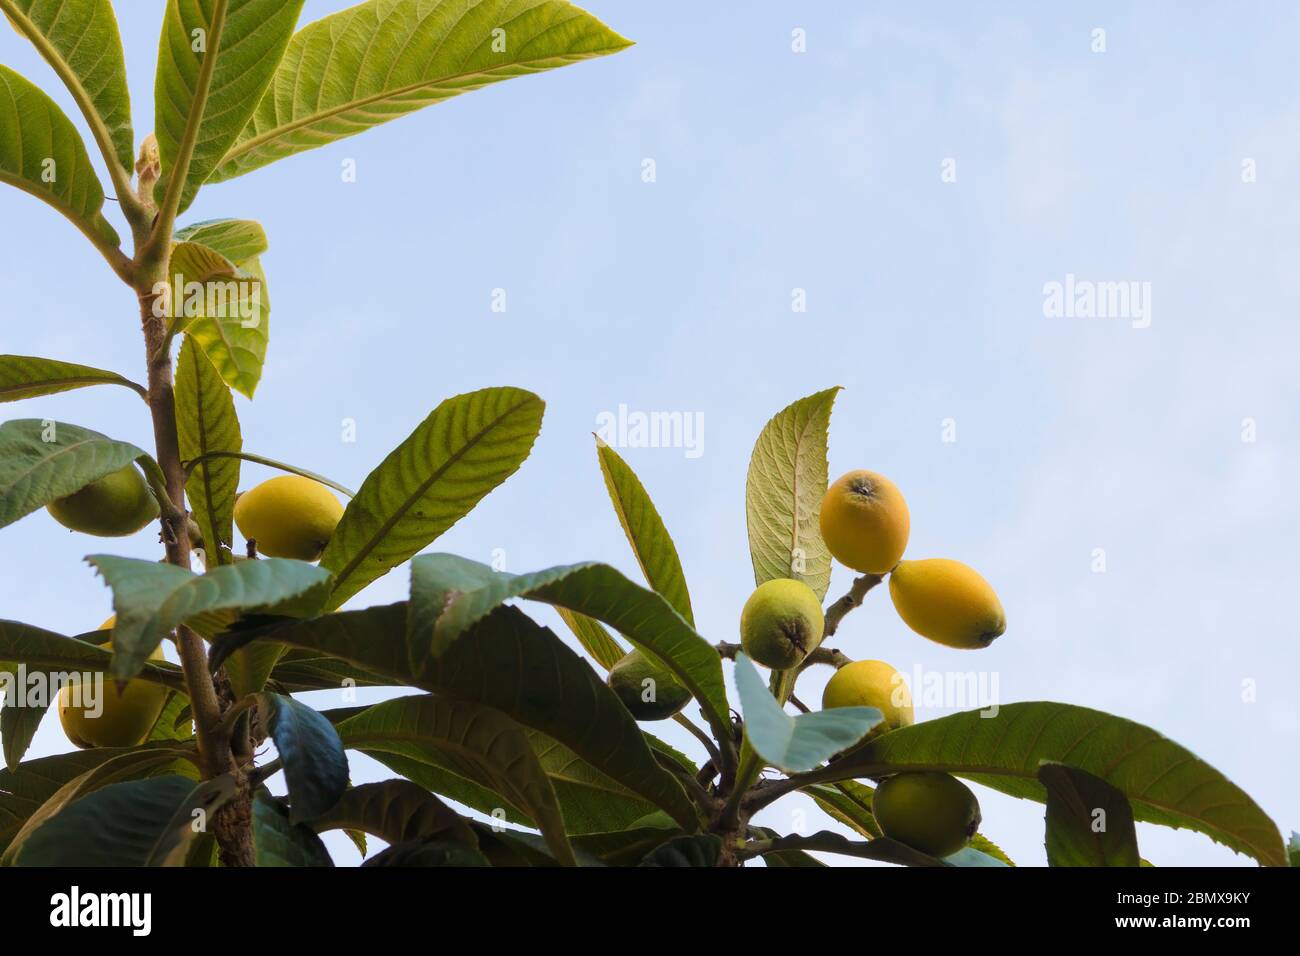 Loquats or japanese medlars are growing on tree with blue clear sky Stock Photo